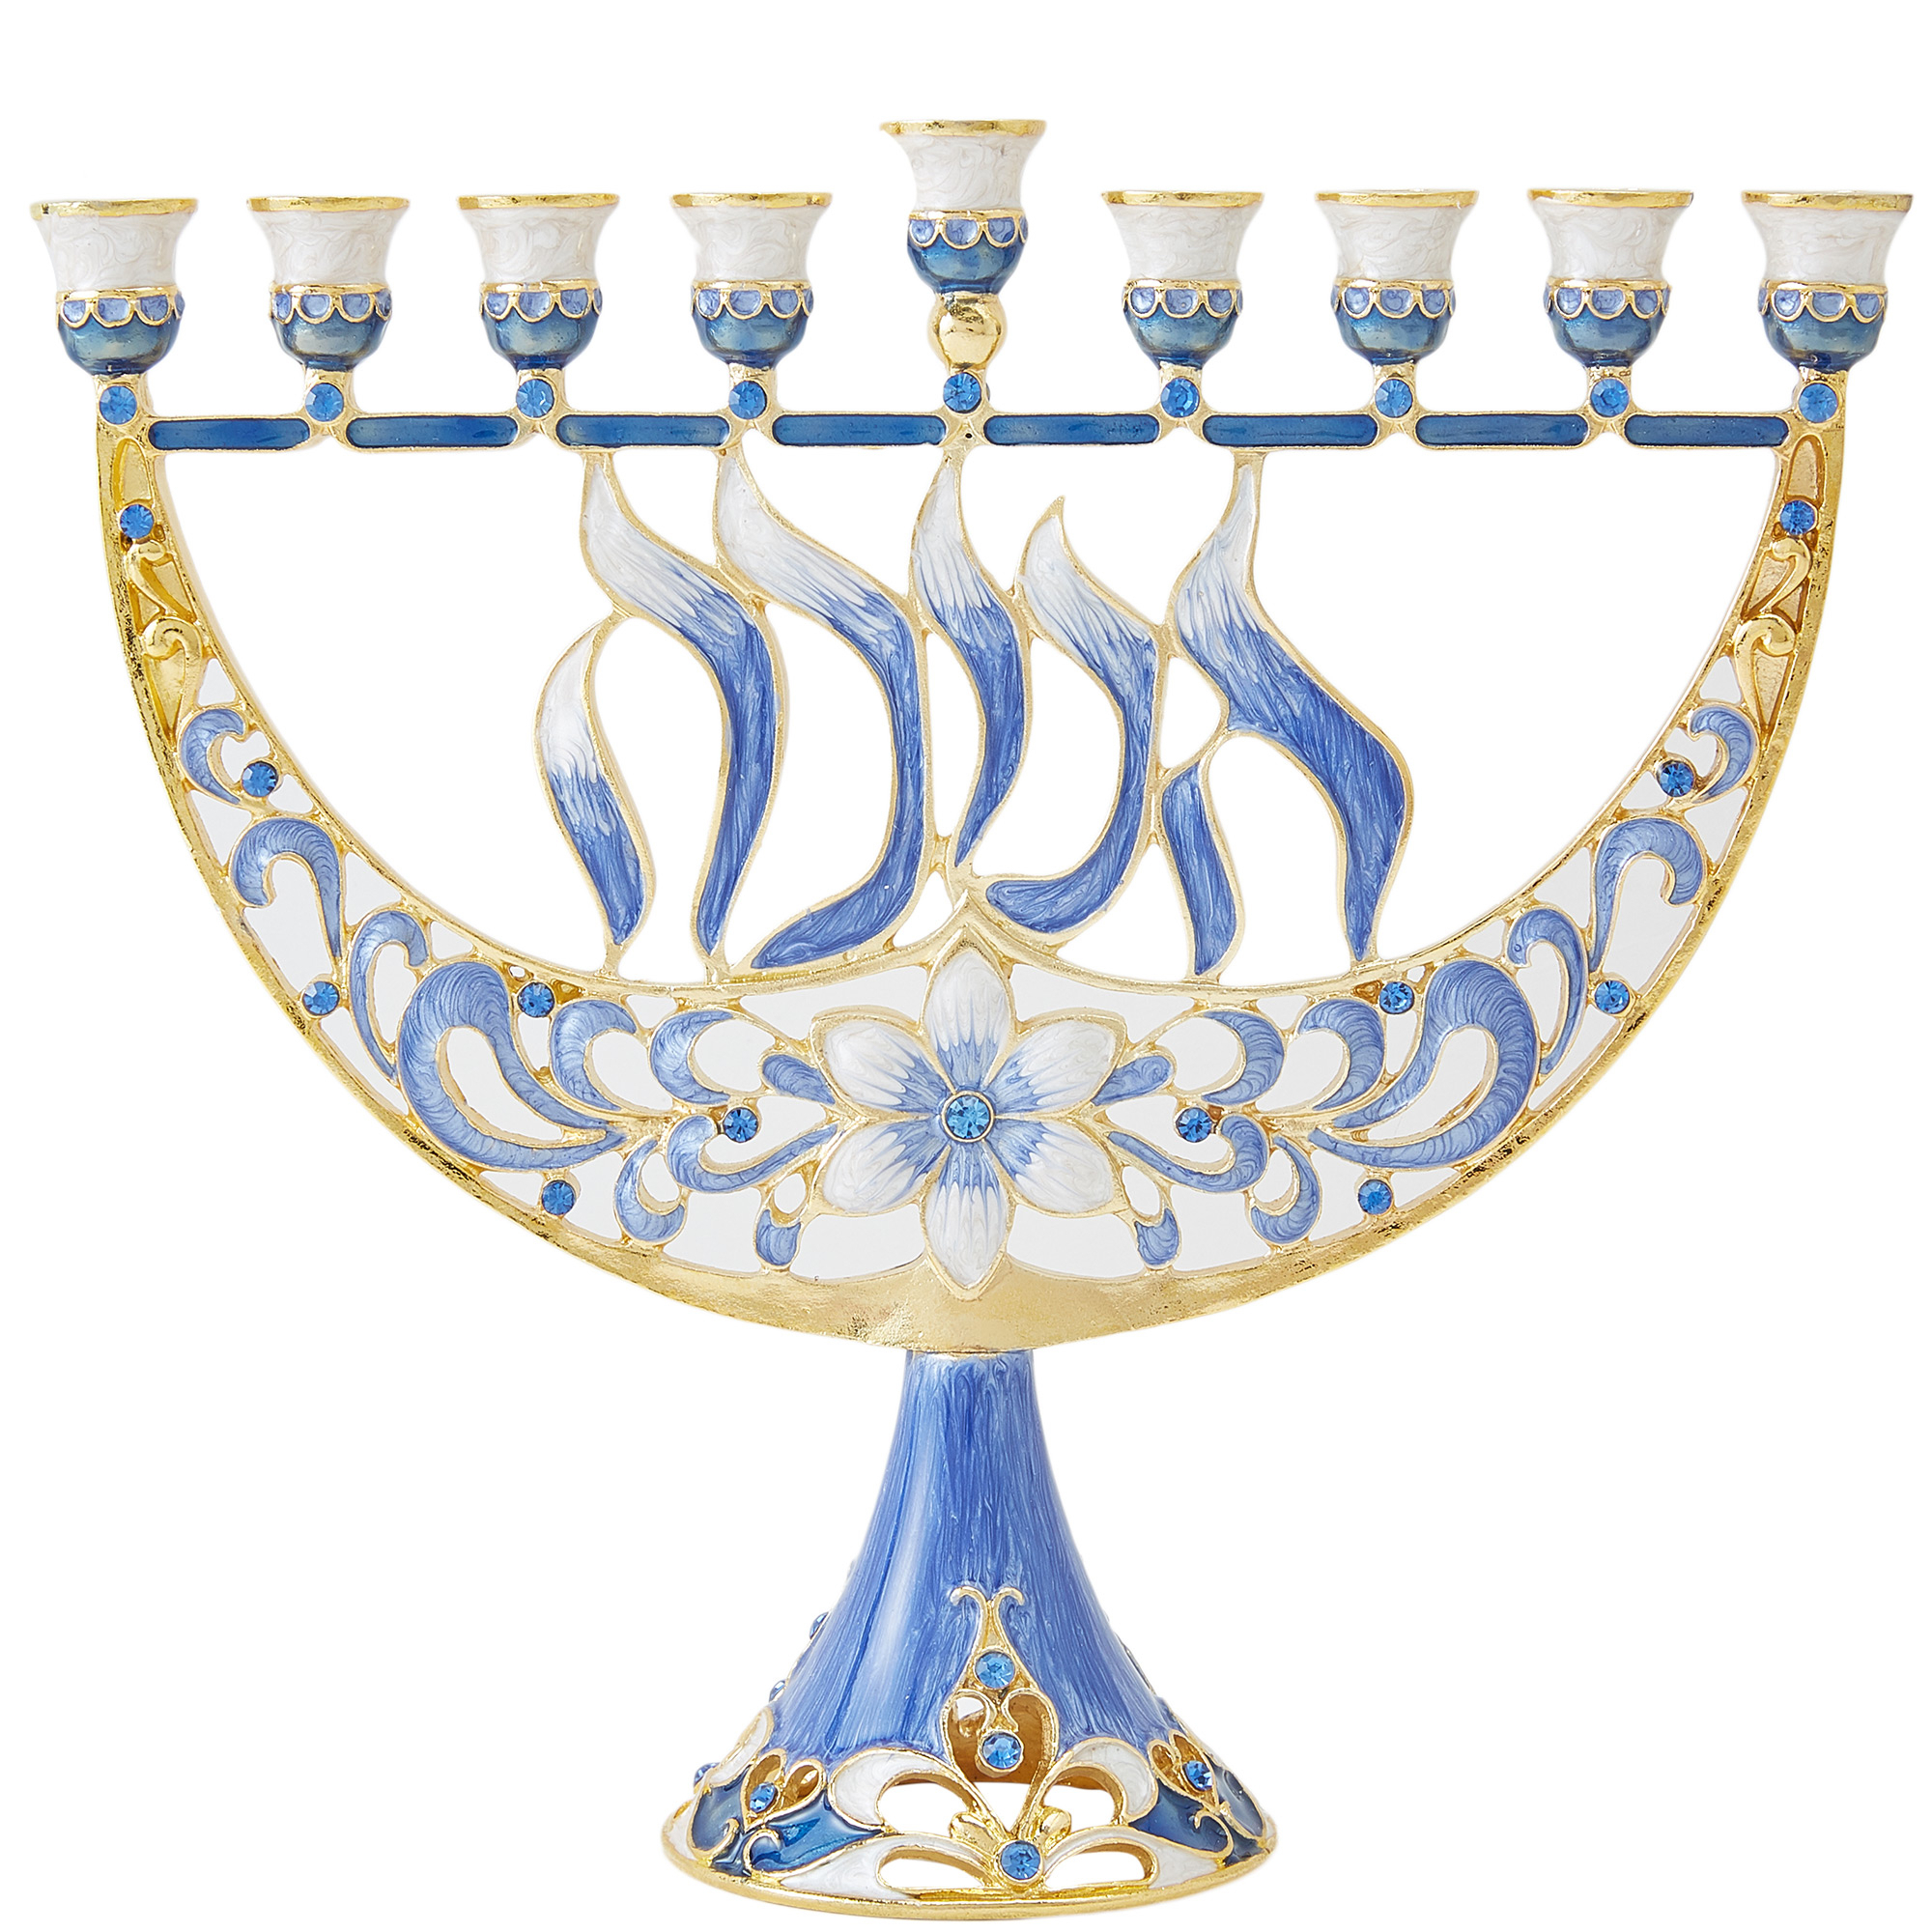 Matashi Hand Painted Enamel Menorah Candelabra With A Flower And Hanukkah Design And Embellished With Gold Accents And High Quality Crystals